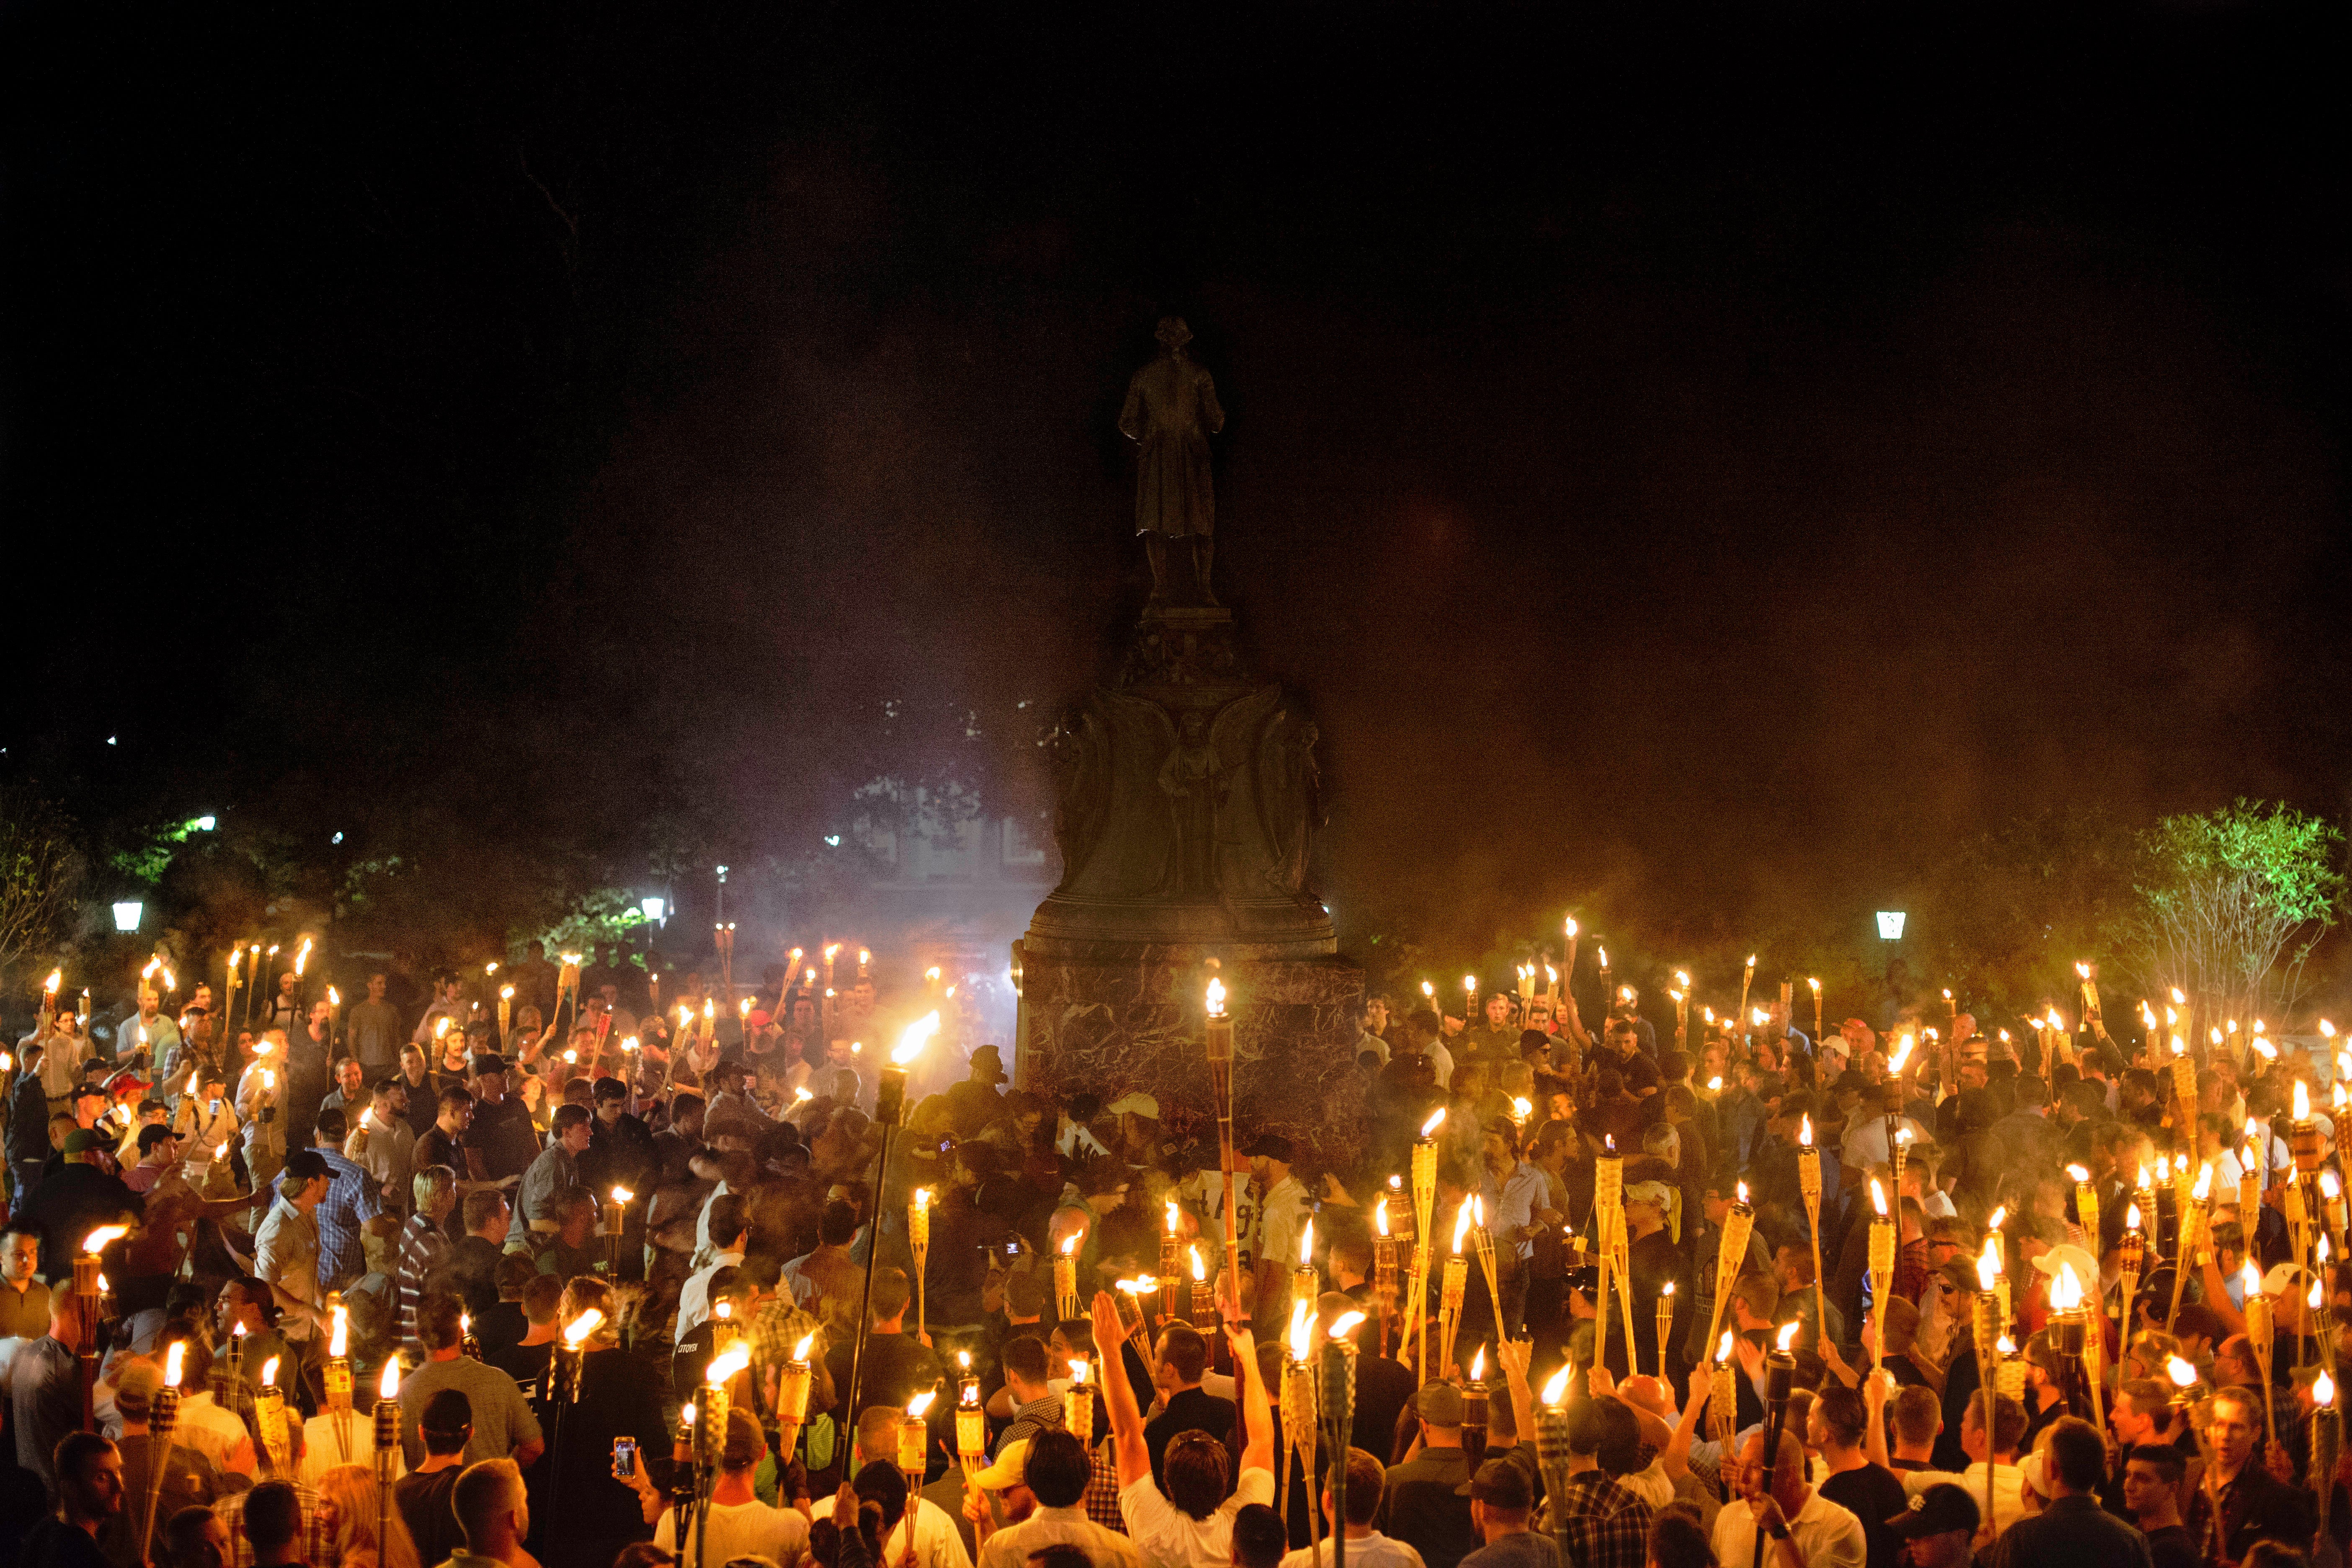 A Year After Trump's Win, It's Never Been Clearer That White Supremacy's Last Stand Is Coming To An End
